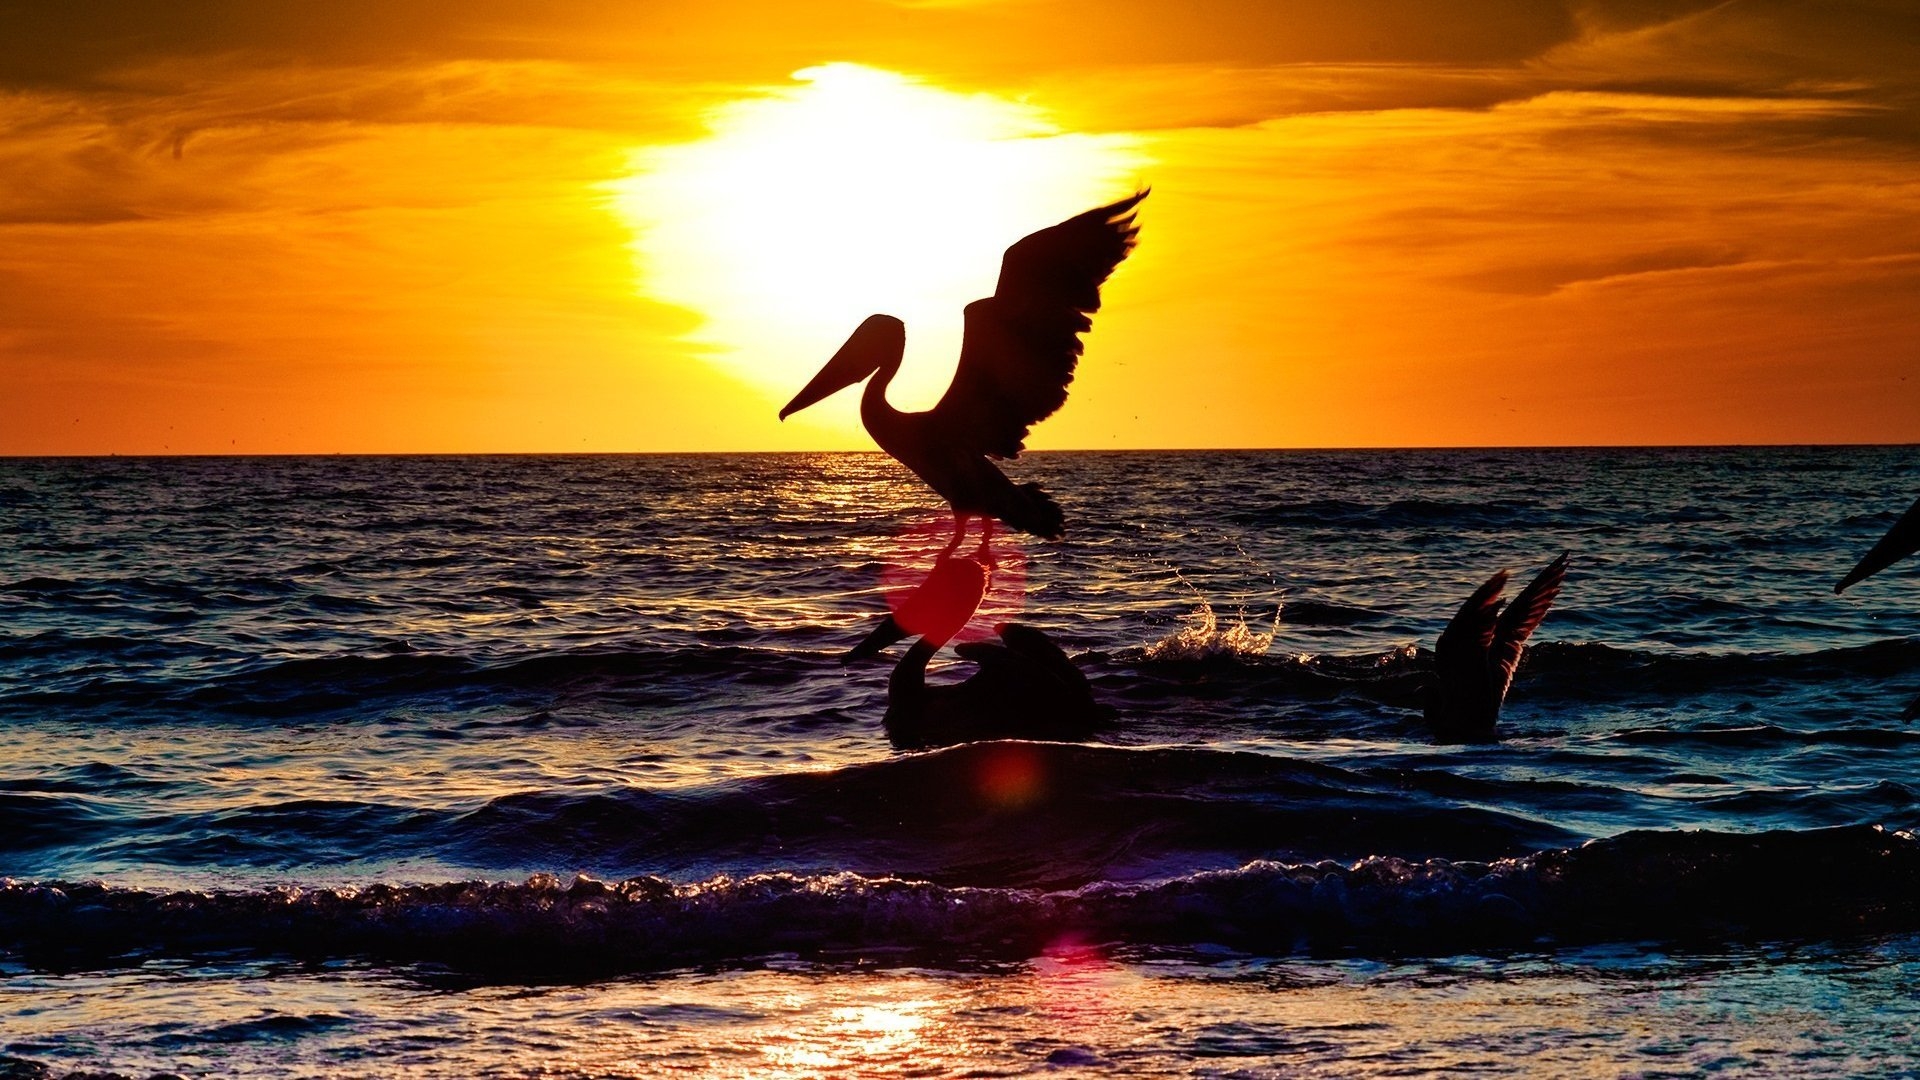 Sunset with two pelicans for 1920 x 1080 HDTV 1080p resolution